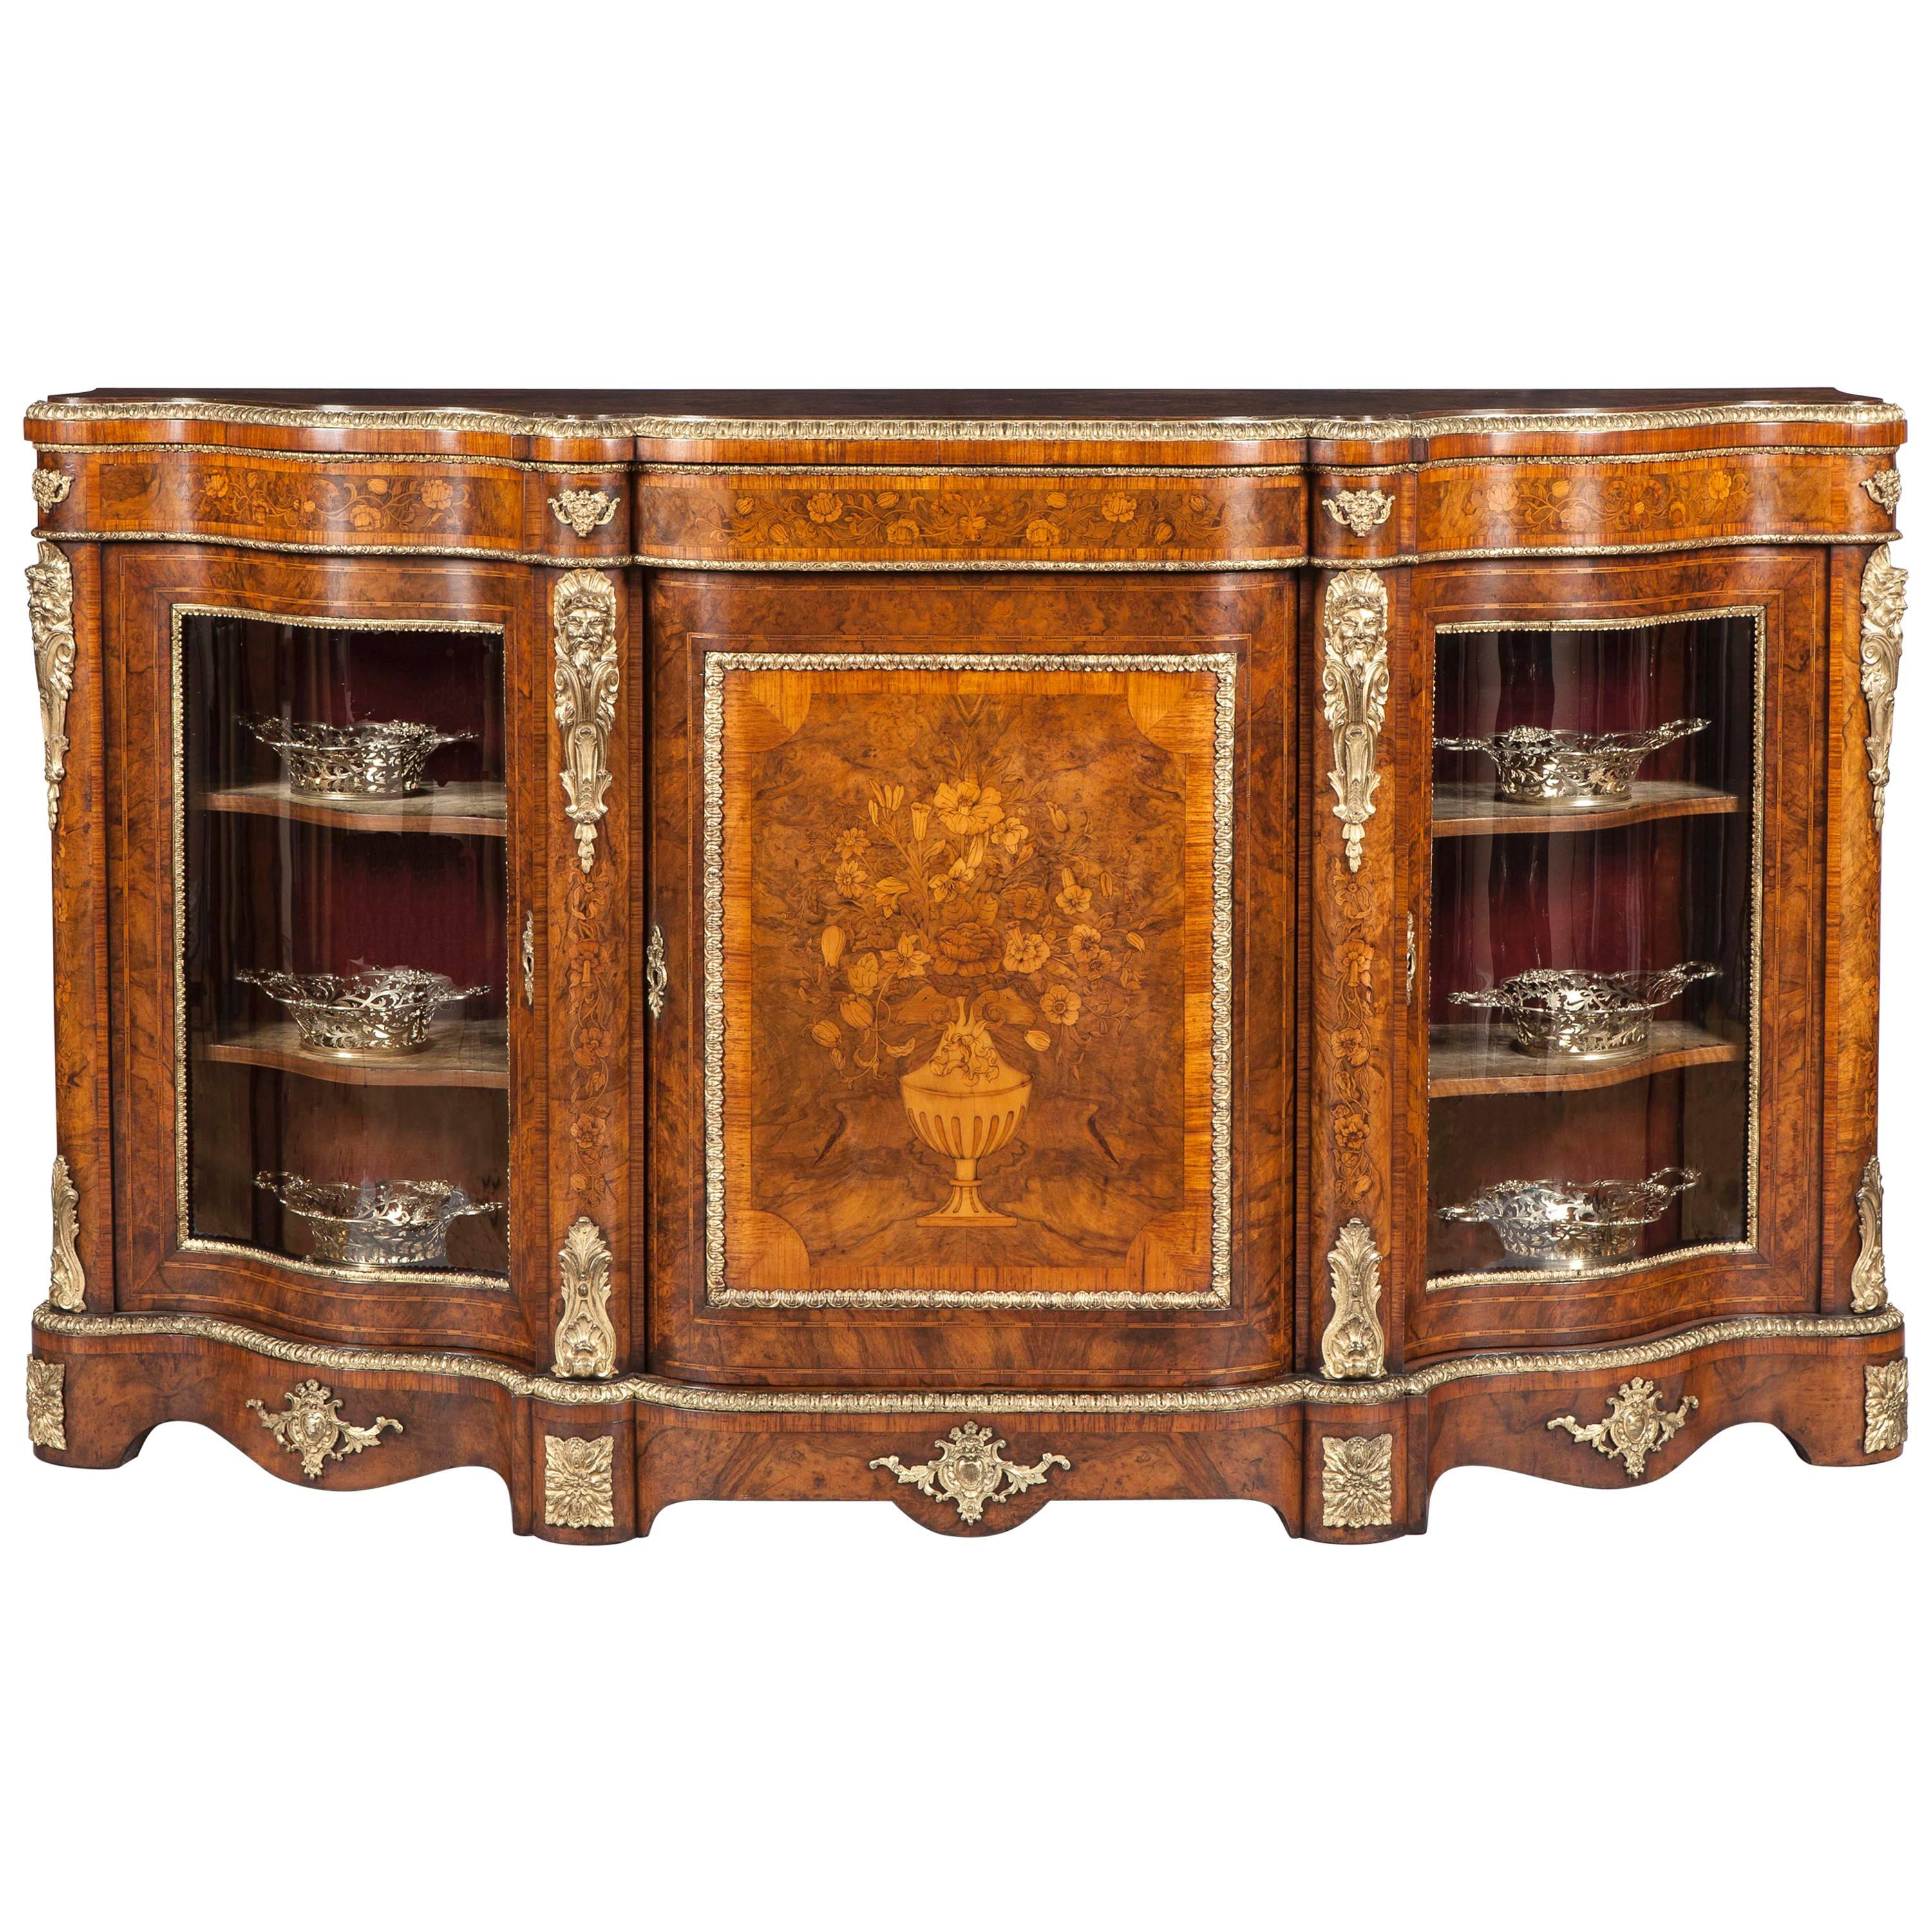 19th Century English Walnut Inlaid Floral Marquetry and Bronze Mounted Credenza For Sale